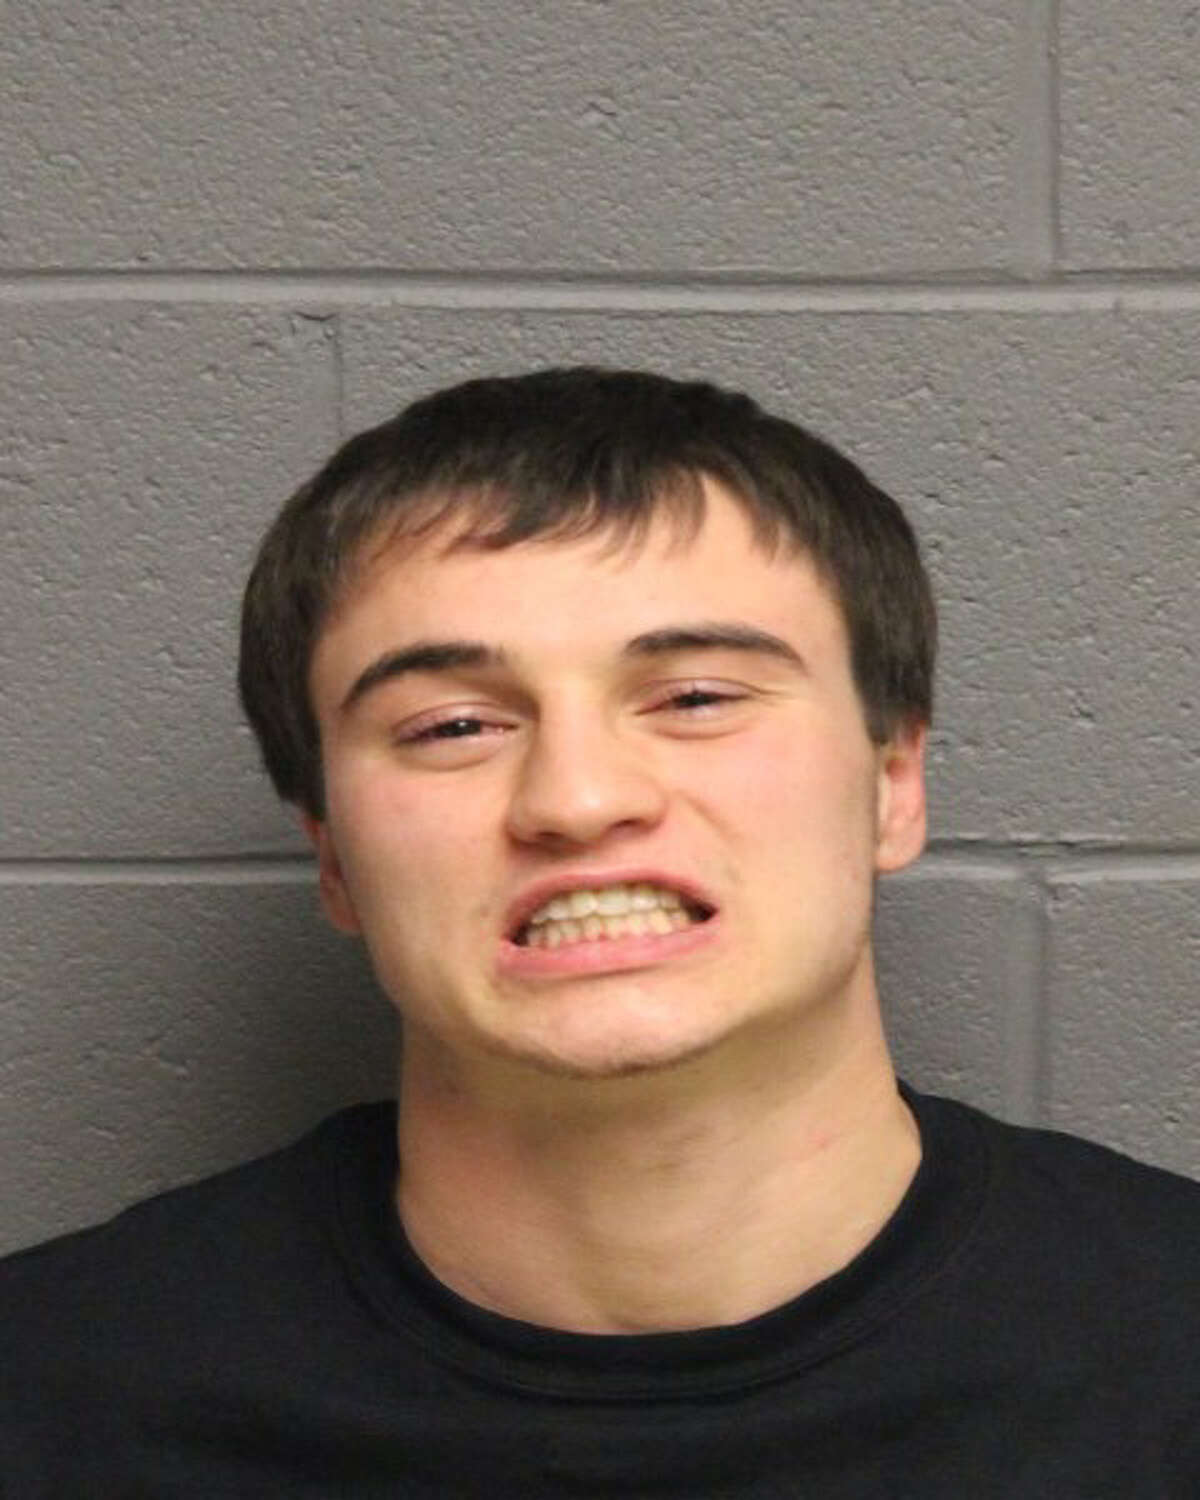 Monroe police arrested 21-year-old Patrick Capozziello late Saturday night after his car collided with an embankment.